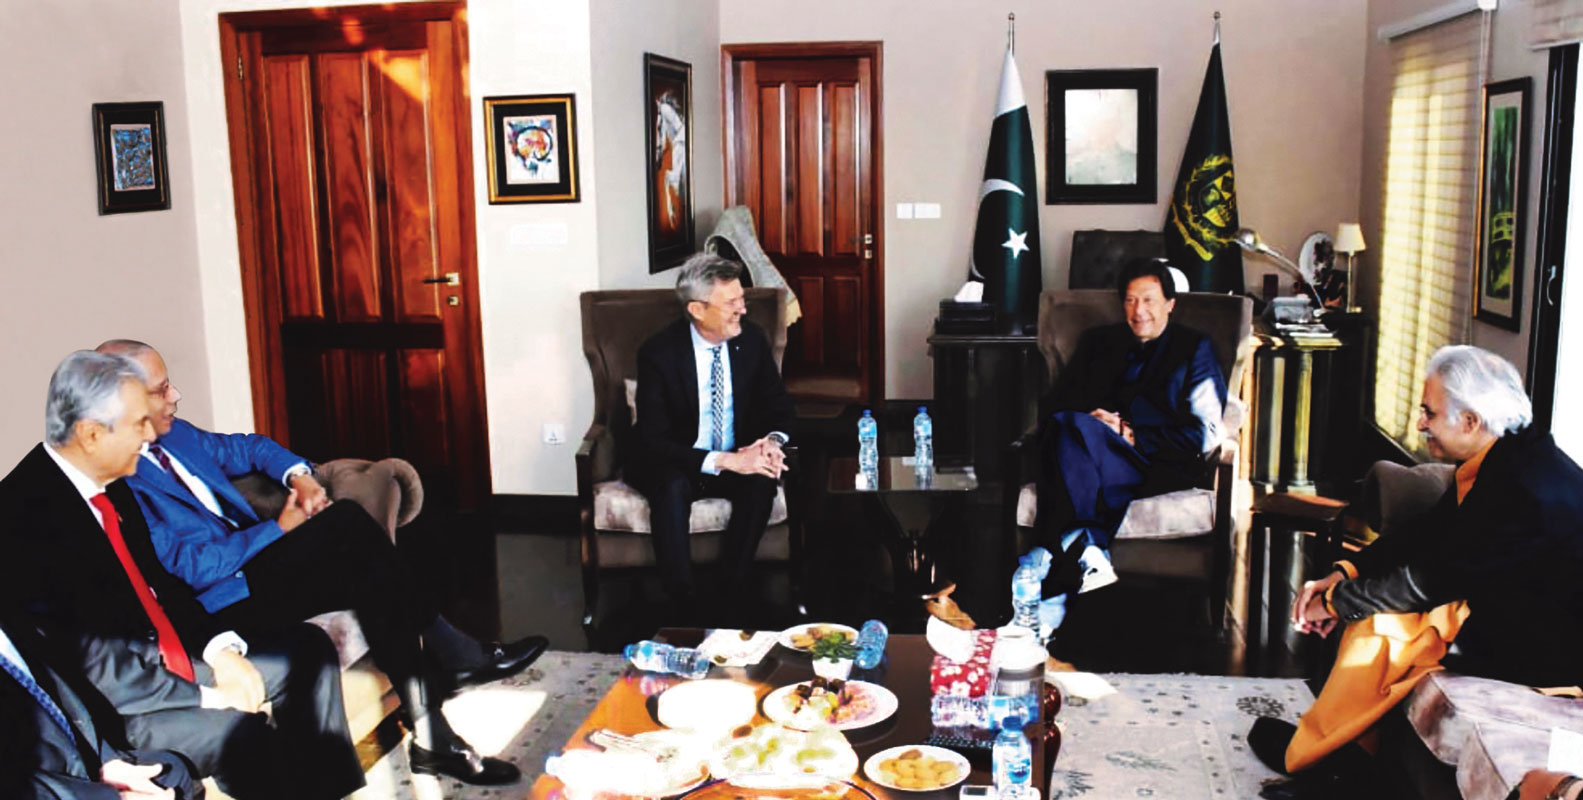 Rotary leaders called on ­Pakistan Prime Minister in Feb, 2020. From L: Pakistan National PolioPlus chair Aziz Memon, TRF trustee chair K R Ravindran, RI President Holger Knaack, Pakistan Prime Minister Imran Khan and Minister of State for Health Zafar Mirza.